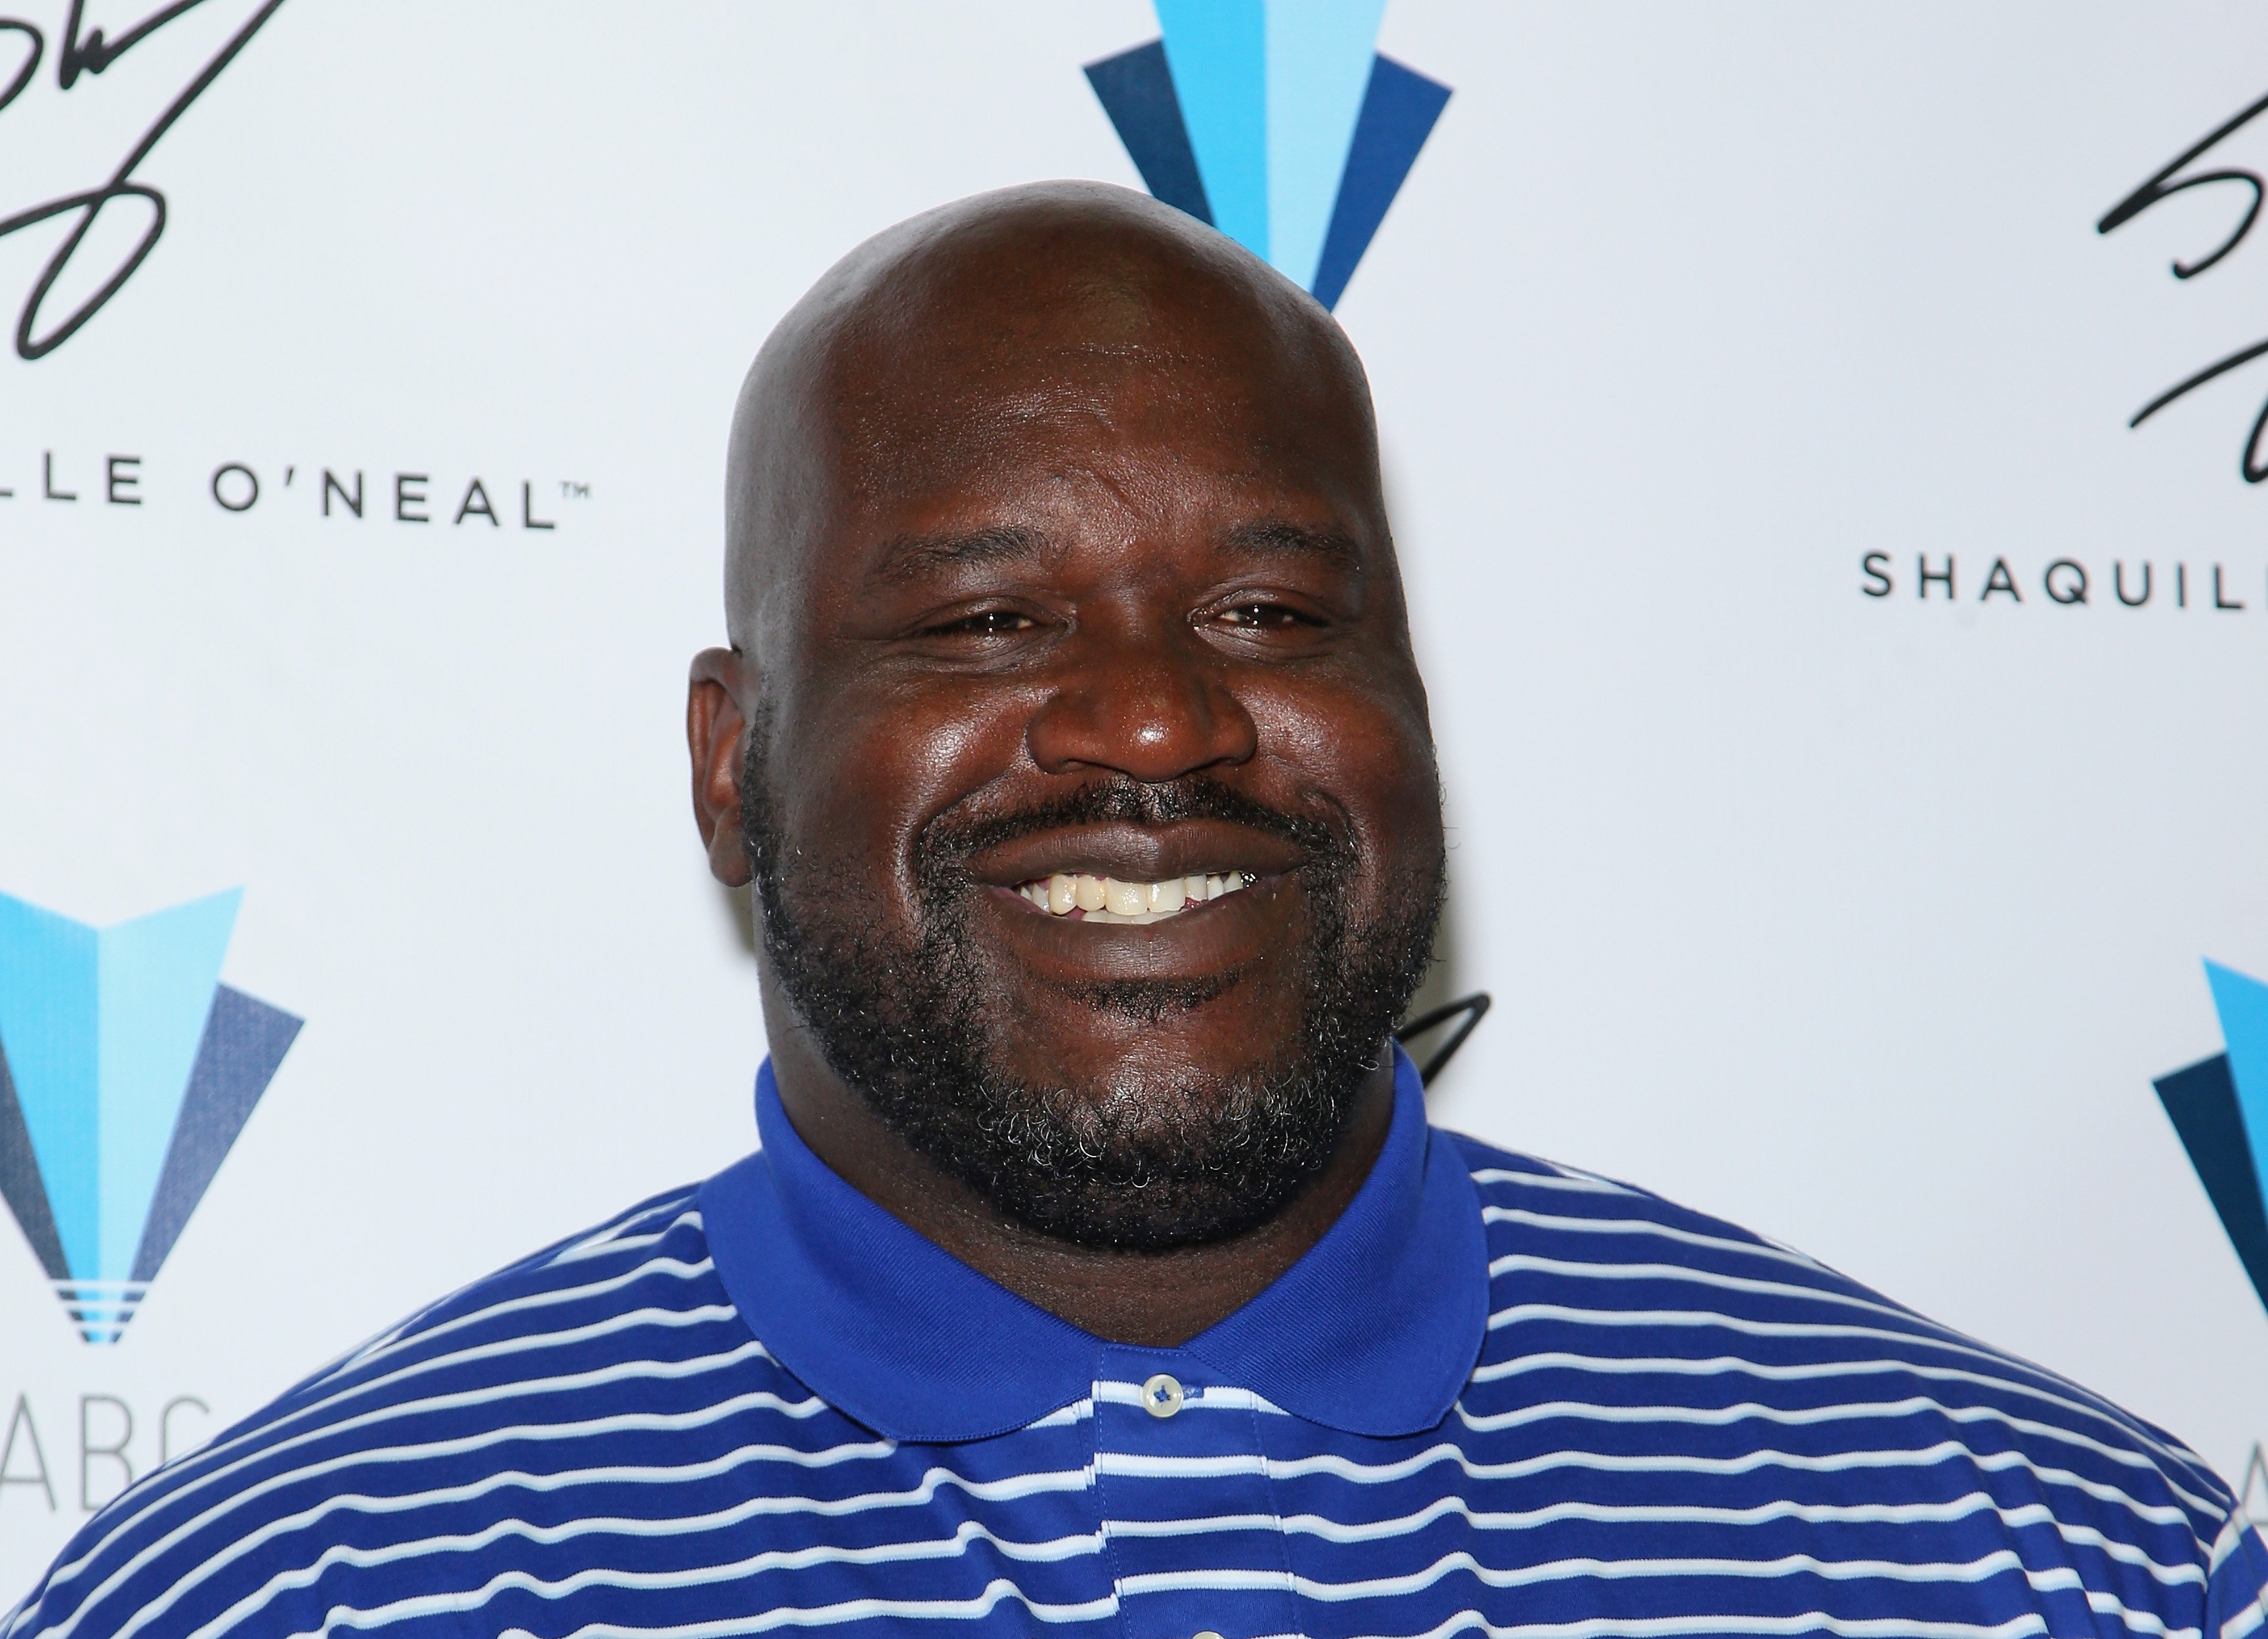 Shaquille O'Neal poses in the Authentic Brands Group booth during the Licensing Expo 2016 at the Mandalay Bay Convention Center on June 21, 2016 | Photo: GettyImages